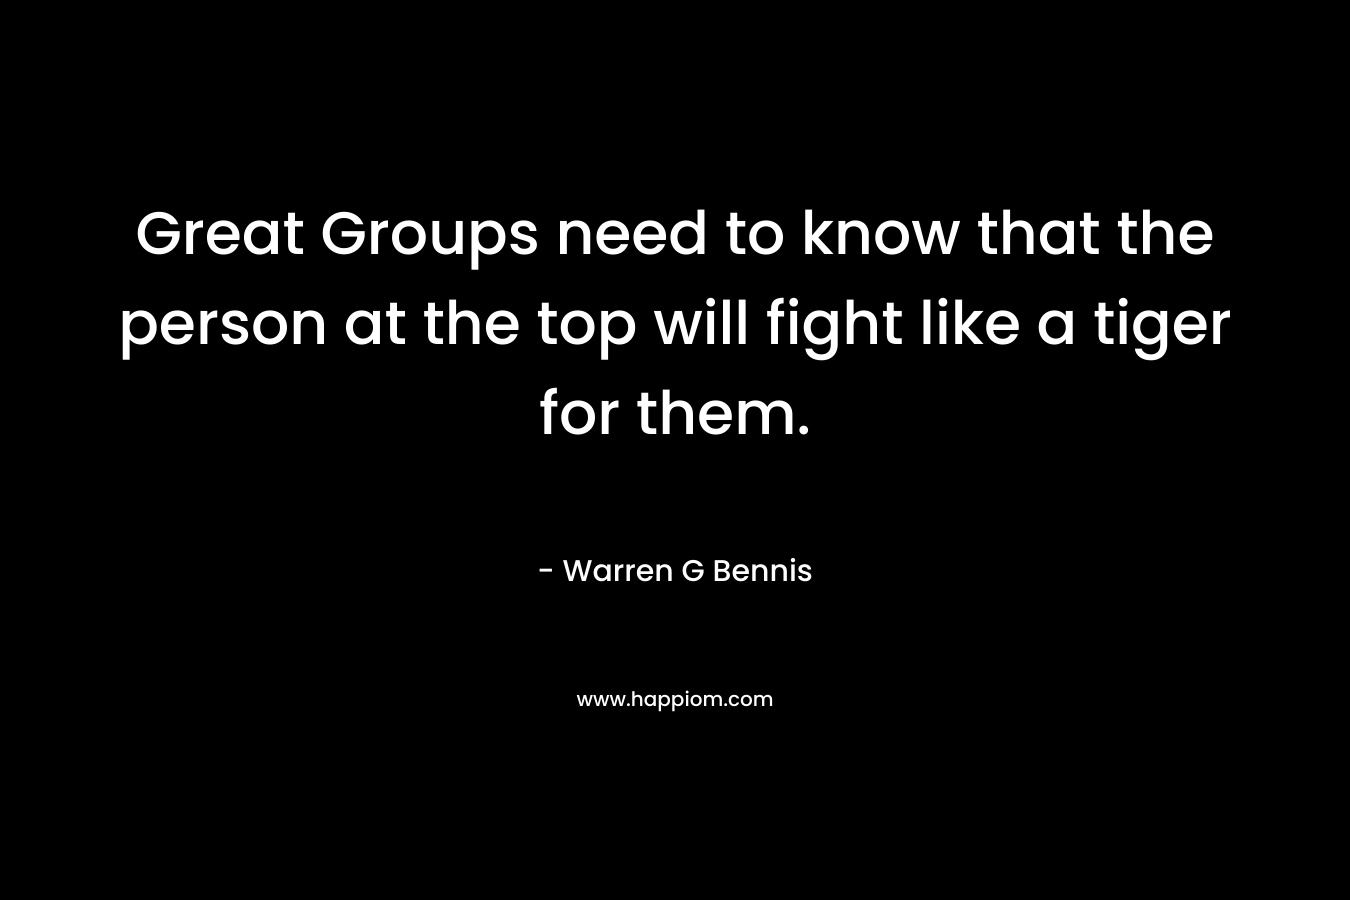 Great Groups need to know that the person at the top will fight like a tiger for them. – Warren G Bennis